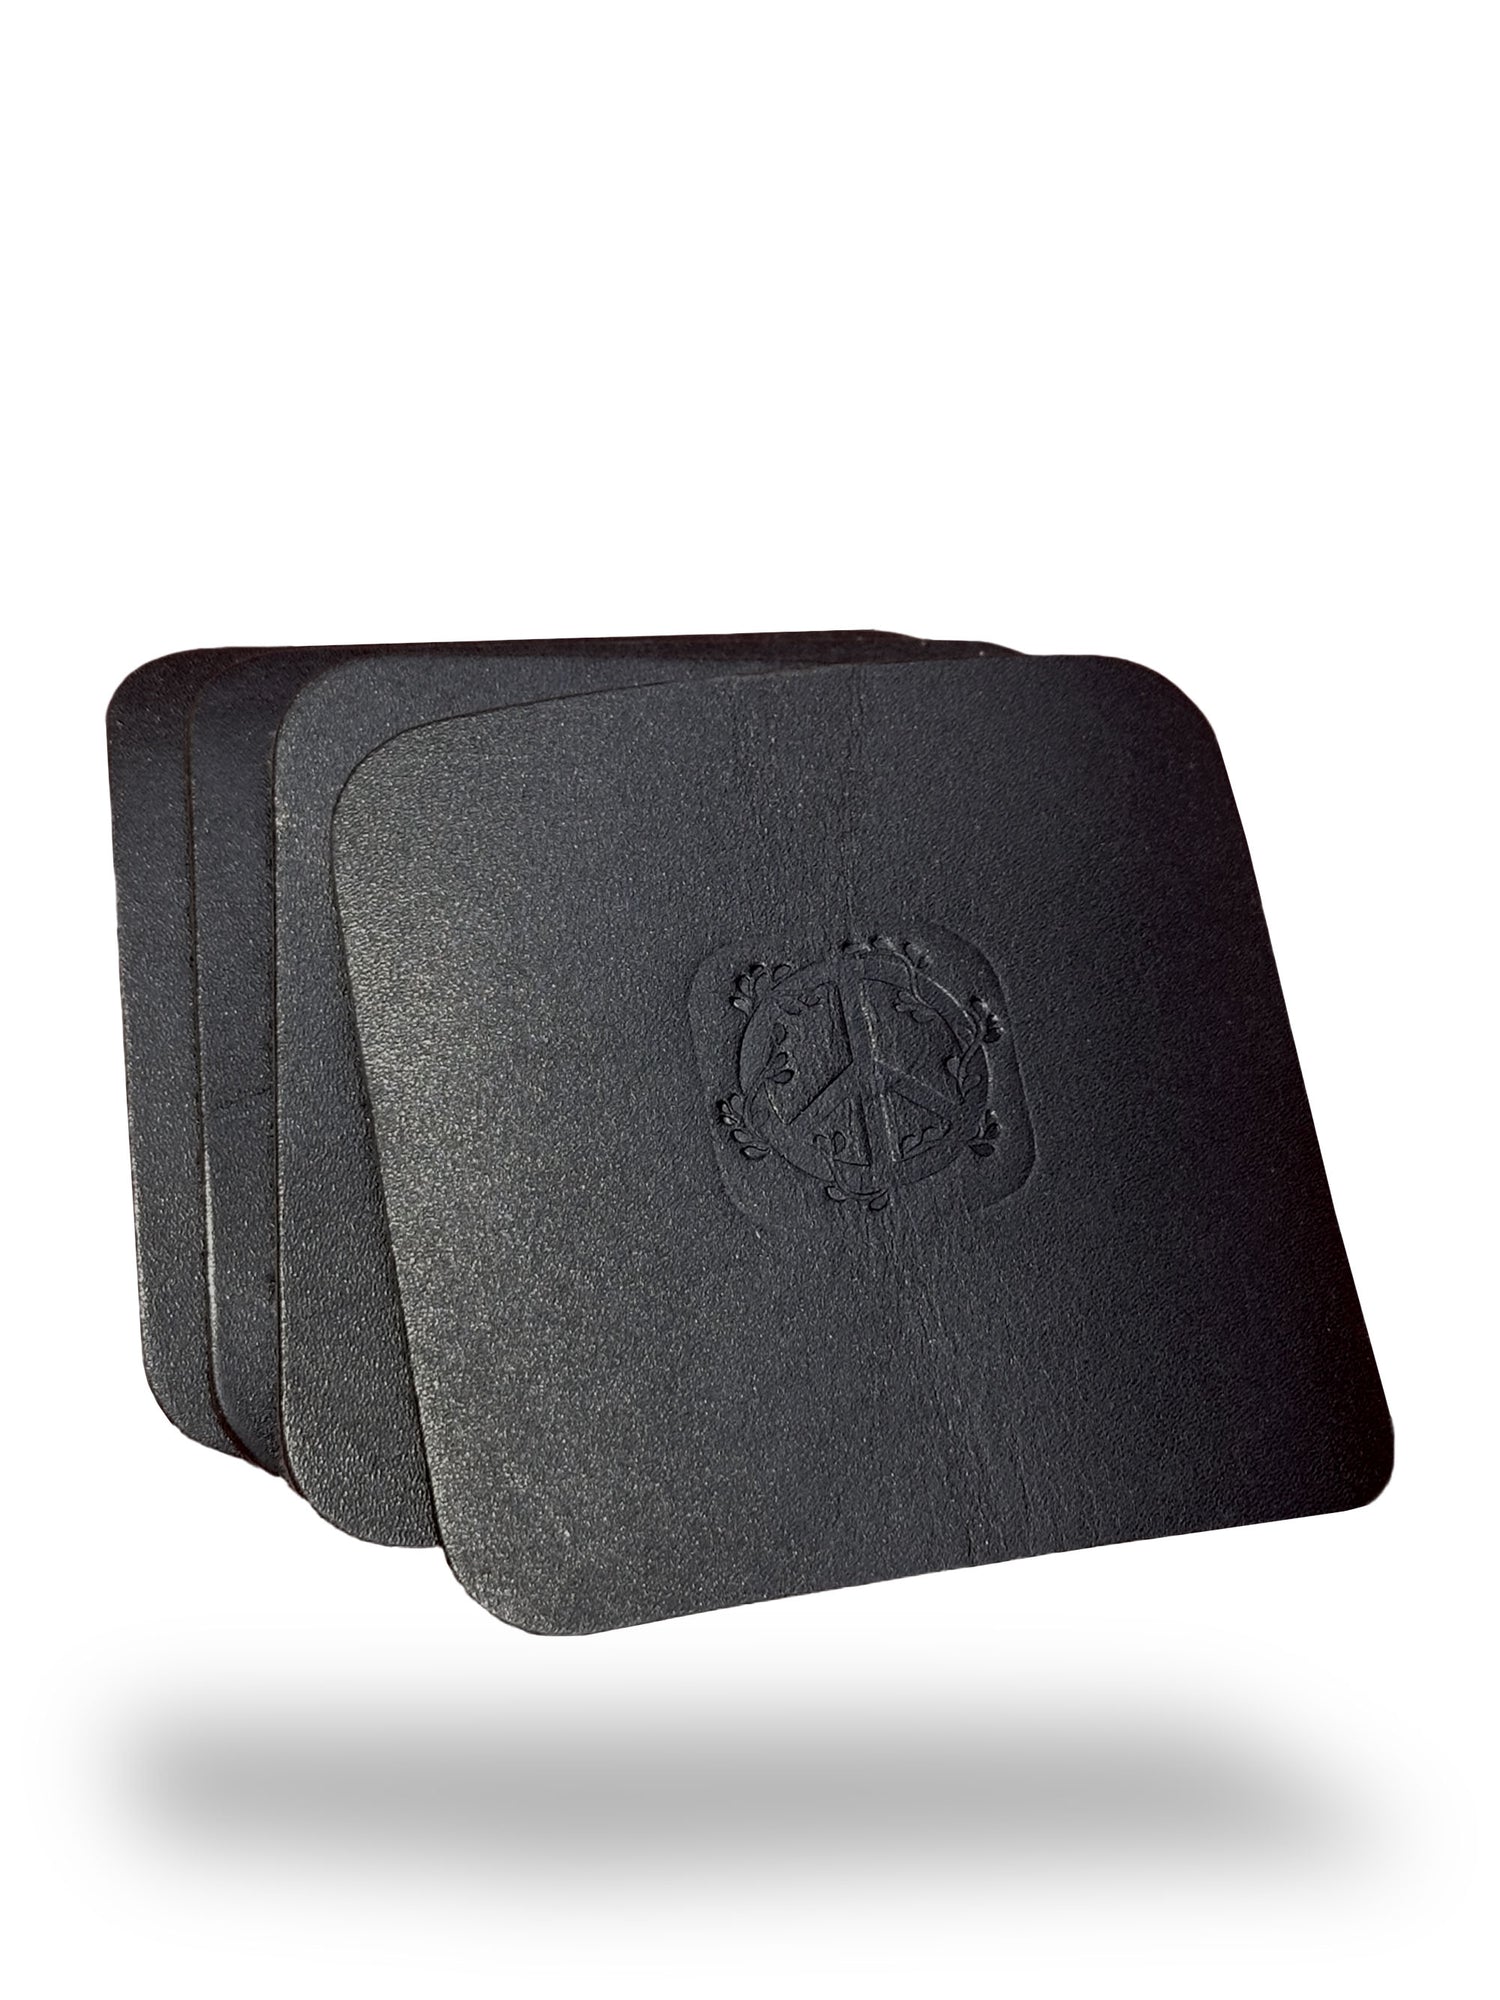 Square Leather Coasters with Peace Sign - Set of 4